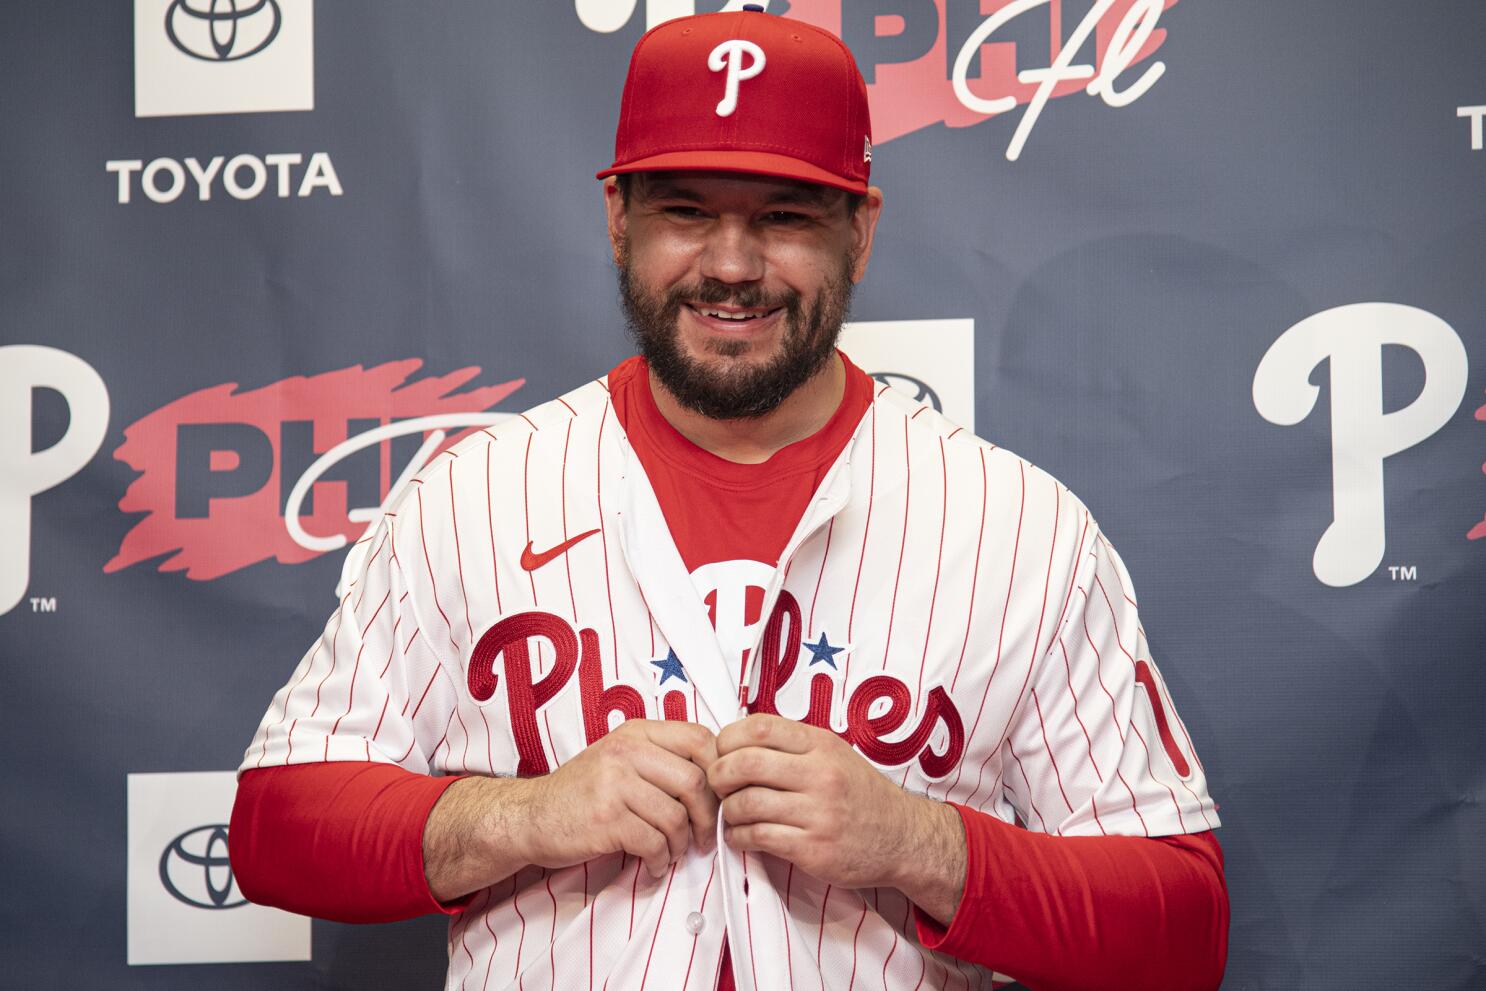 Kyle Schwarber's power has taken the lead for Phillies this year